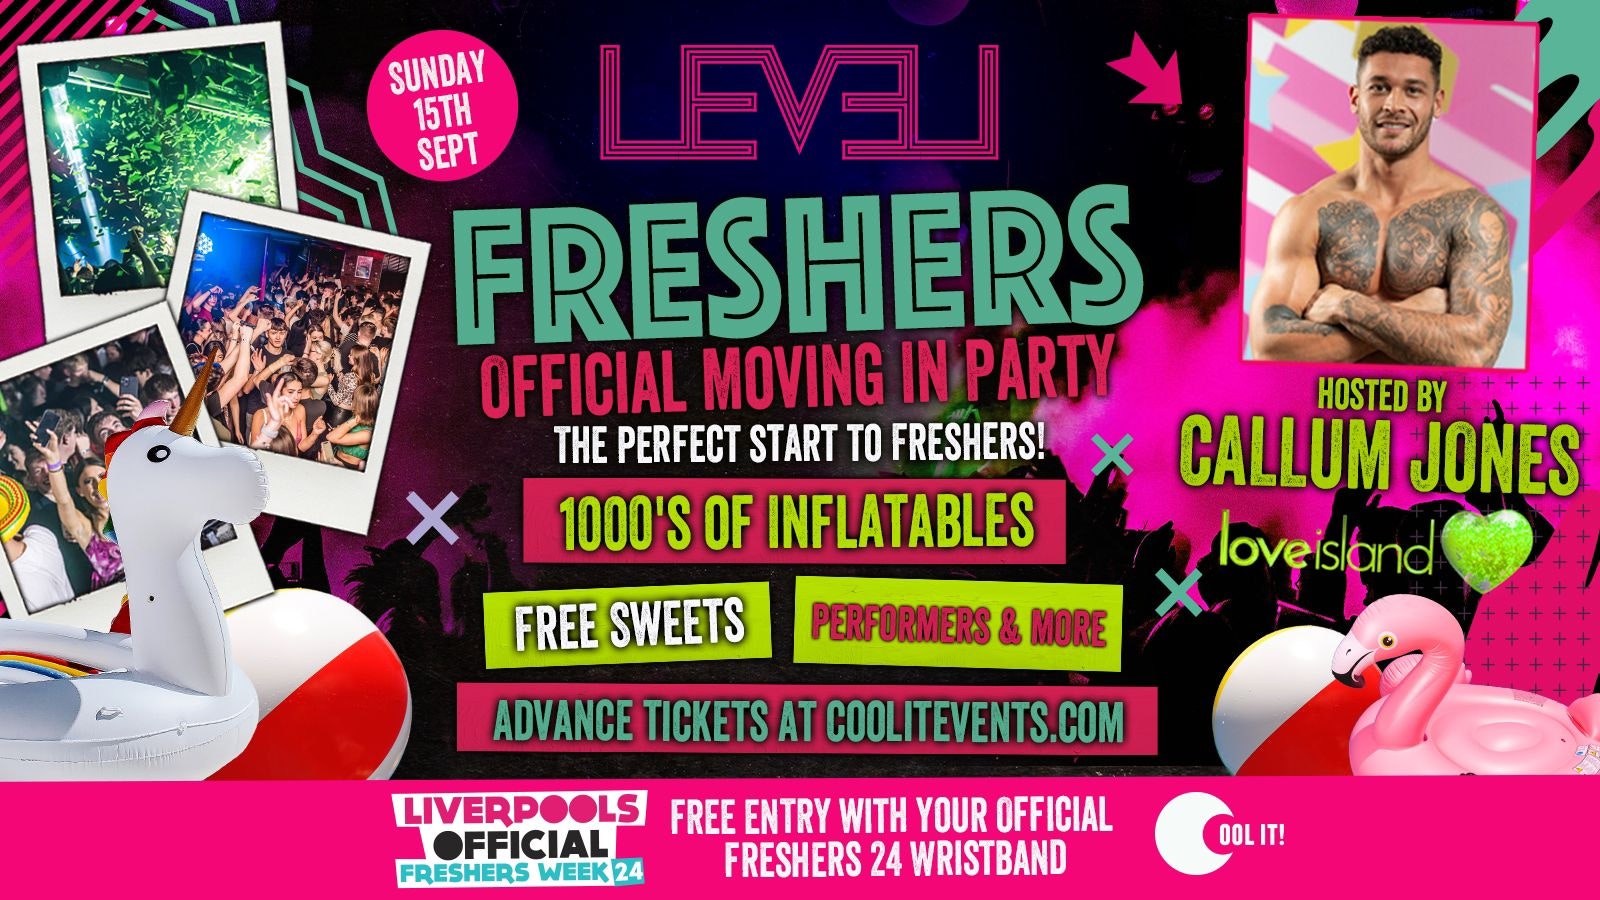 Freshers OFFICIAL MOVING IN PARTY 🏠 Hosted by CALLUM JONES ☀️